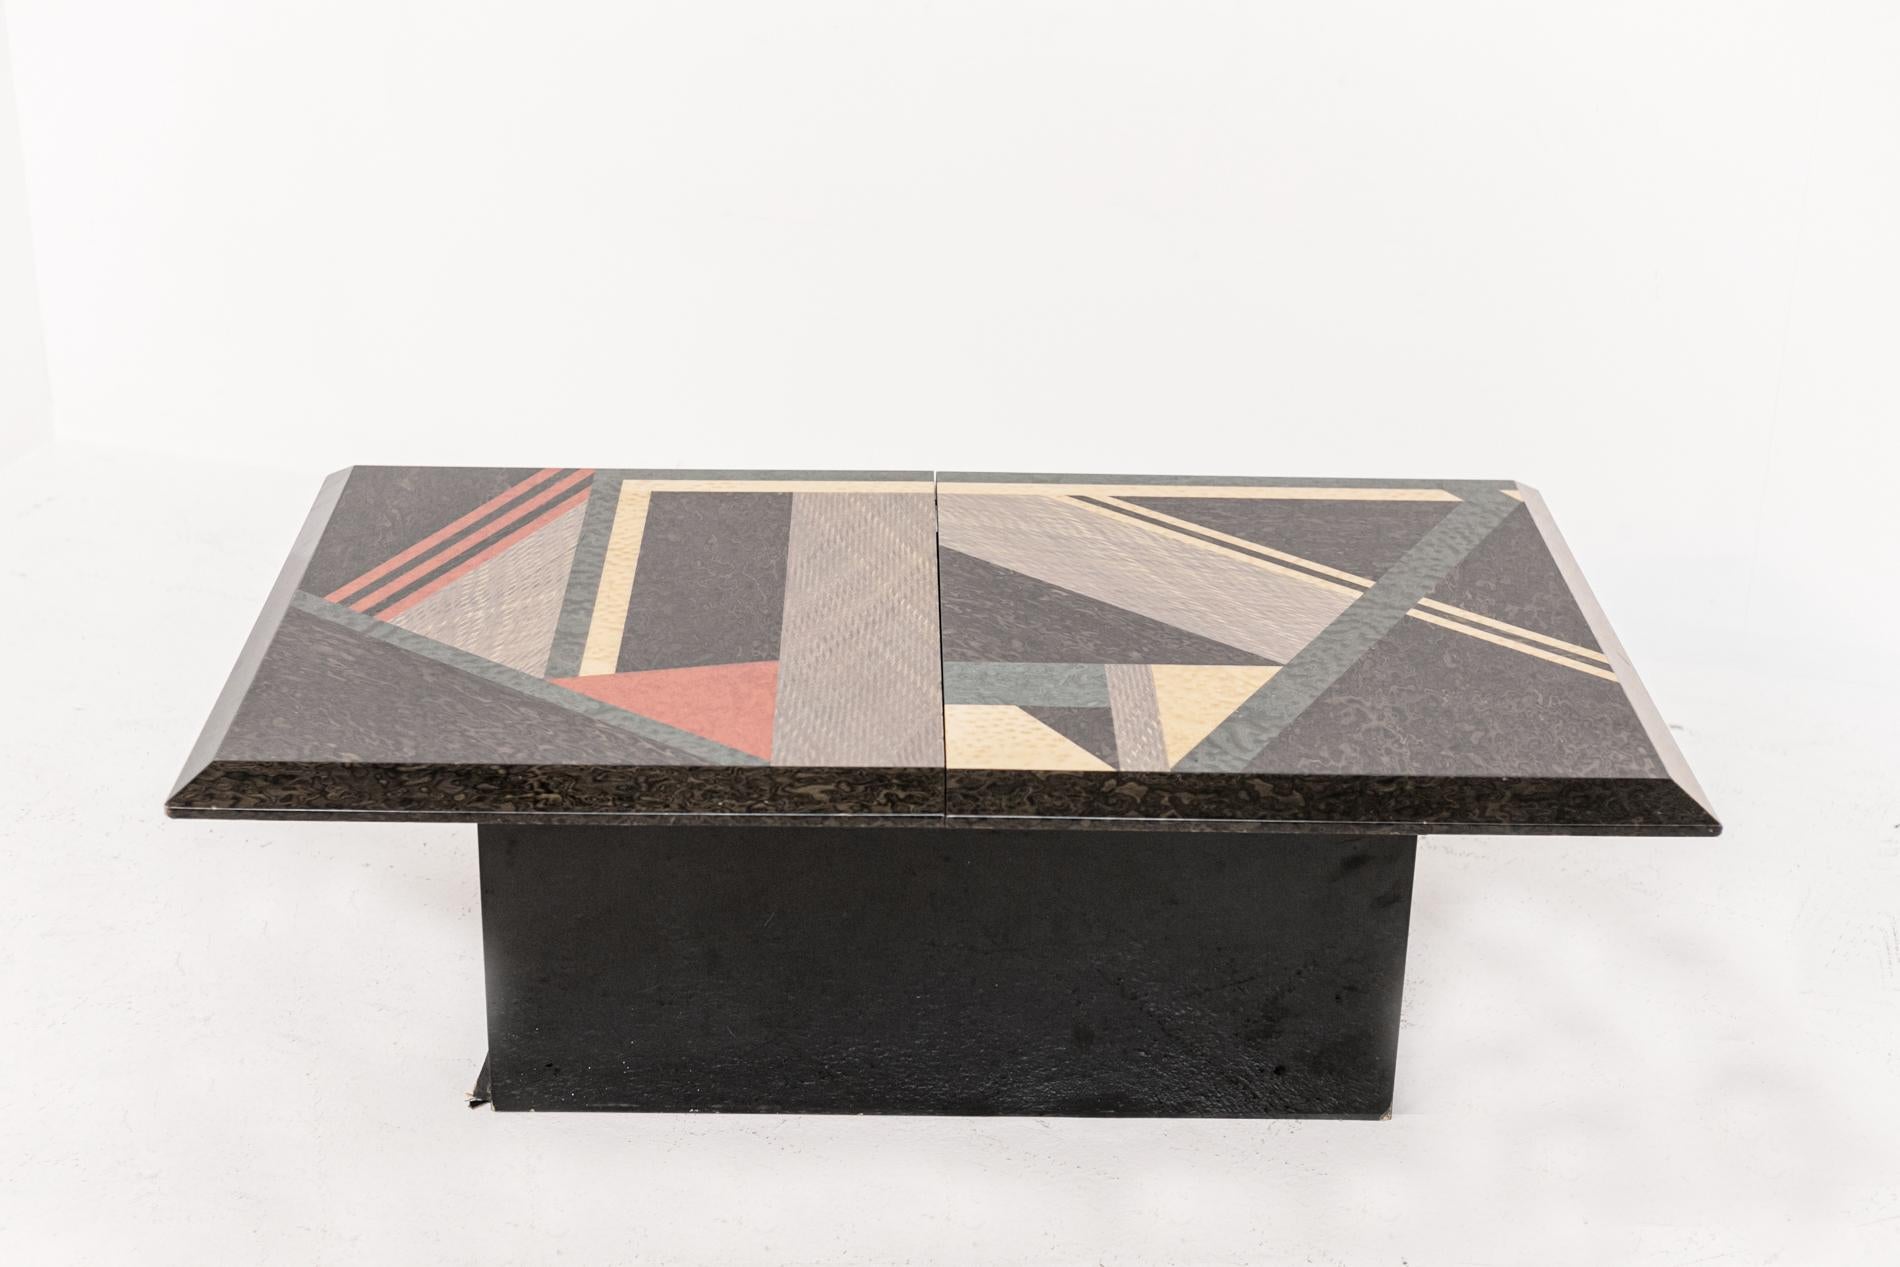 Italian coffee table from the 1980s with extendable top that opens the hidden dry bar, designed by Giovanni Offredi and manufactured by Saporiti. The base of the table is made of black lacquered wood. The table top is made of multicolored burl wood